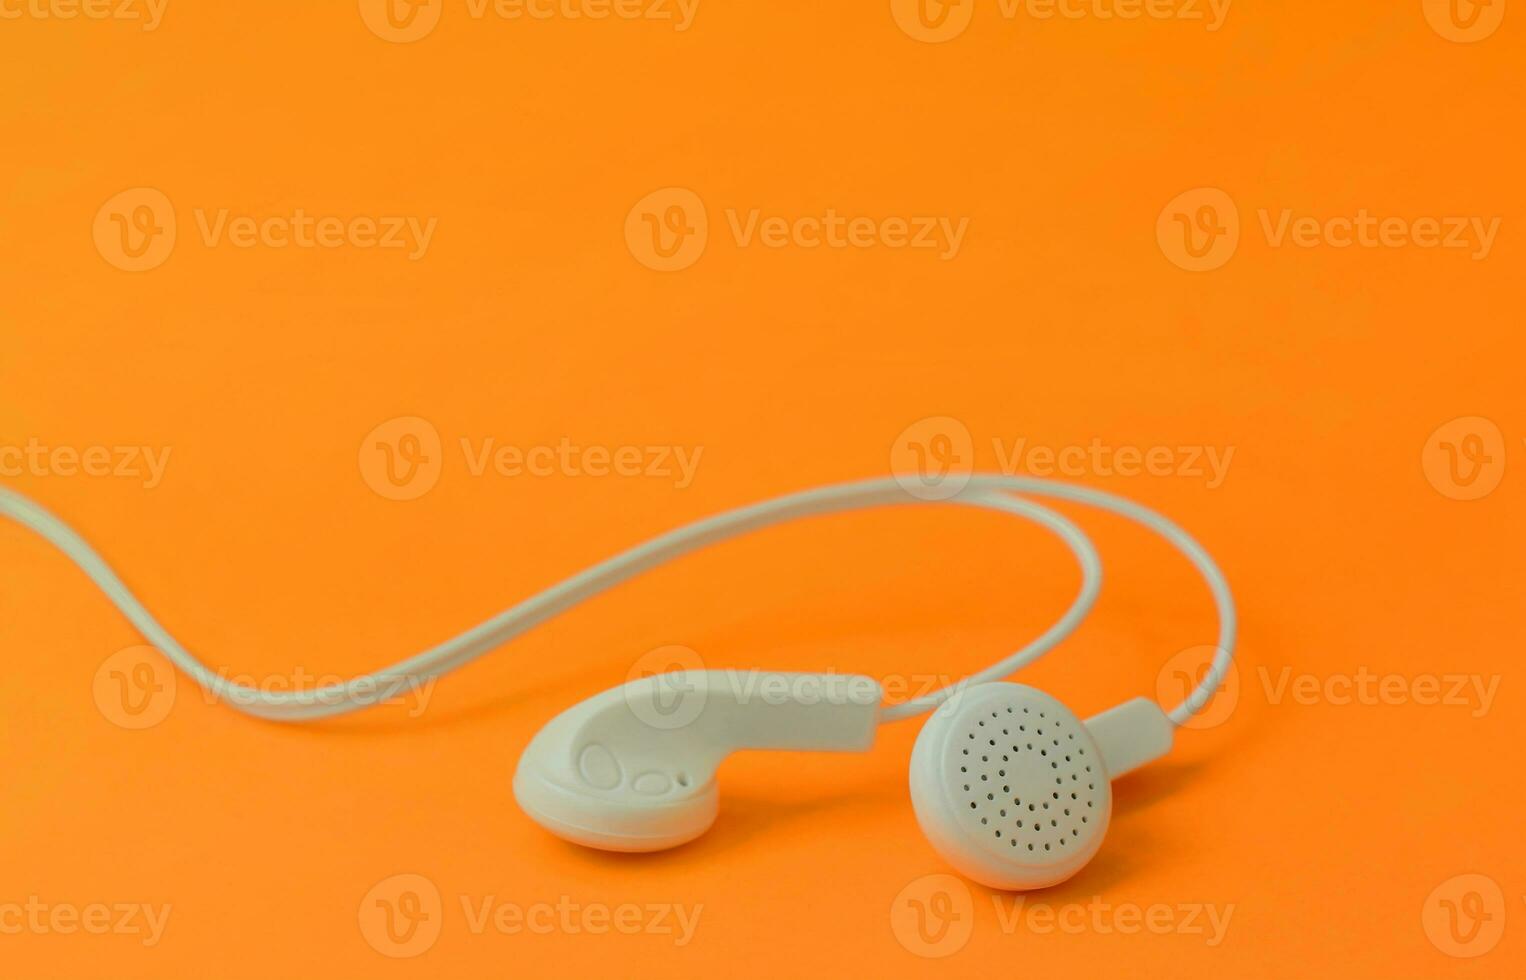 A template for music listening fans. White earphones on red photo